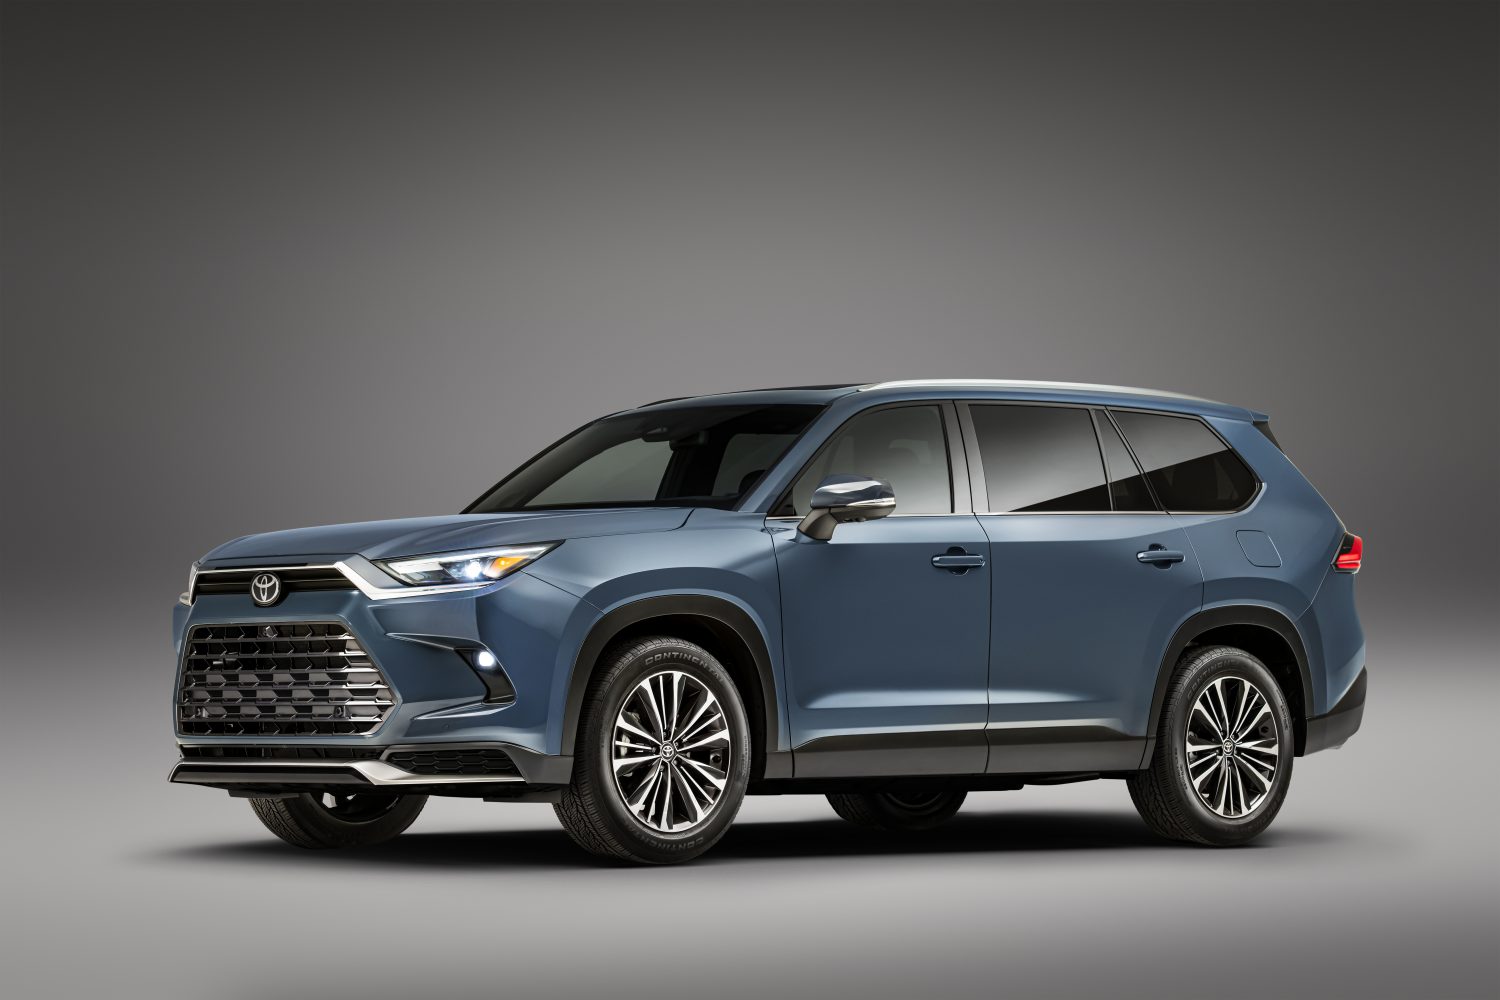 The Ultimate Family SUV: Toyota Grand Highlander Makes World Premiere